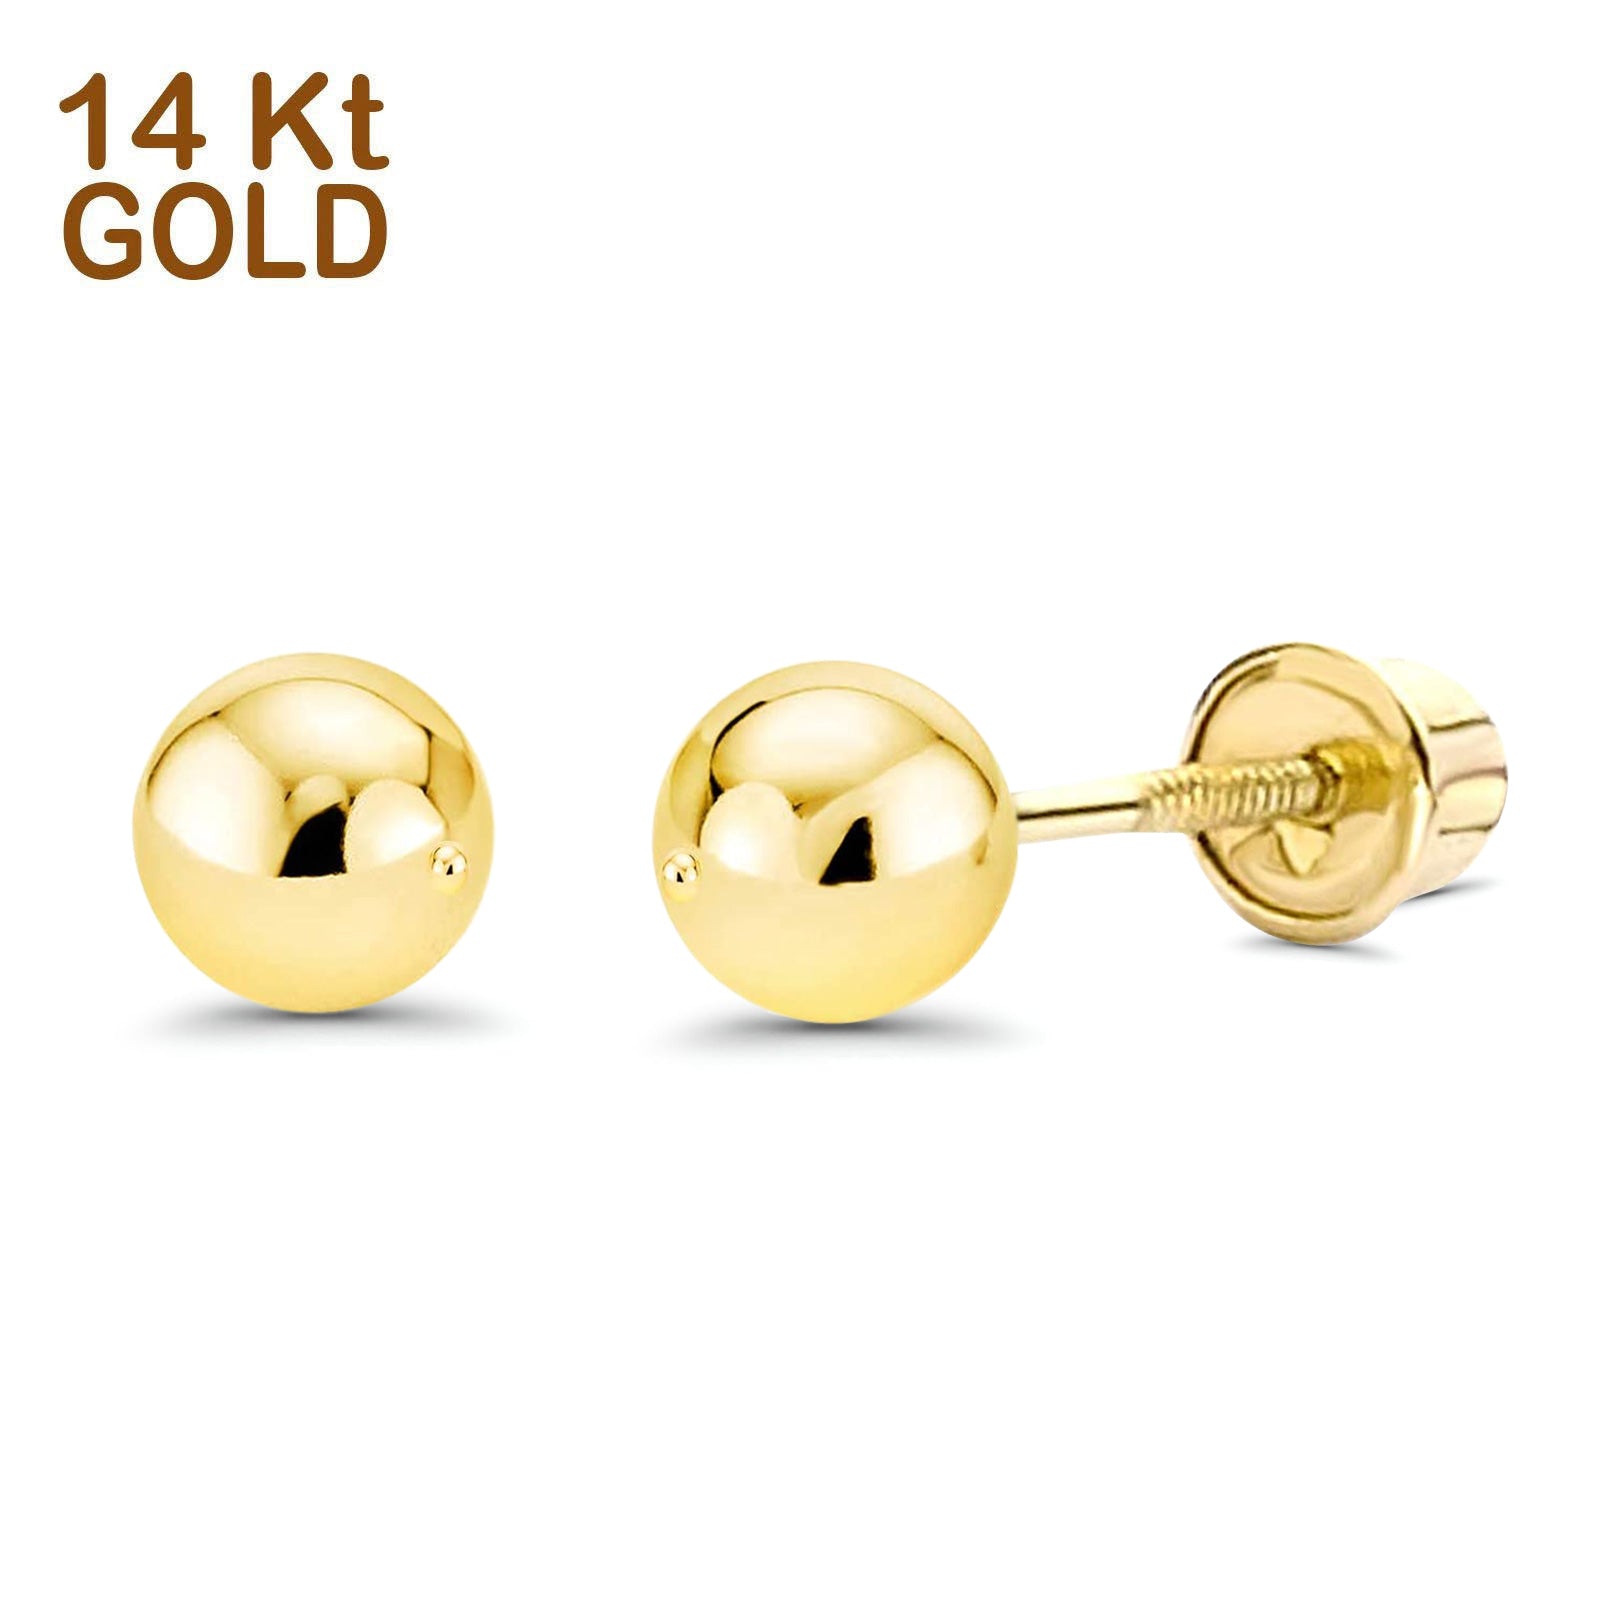 Solid 14K Yellow Gold Screw Ball Earrings - 5 Different Size Available, Best Anniversary Birthday Gift for Her